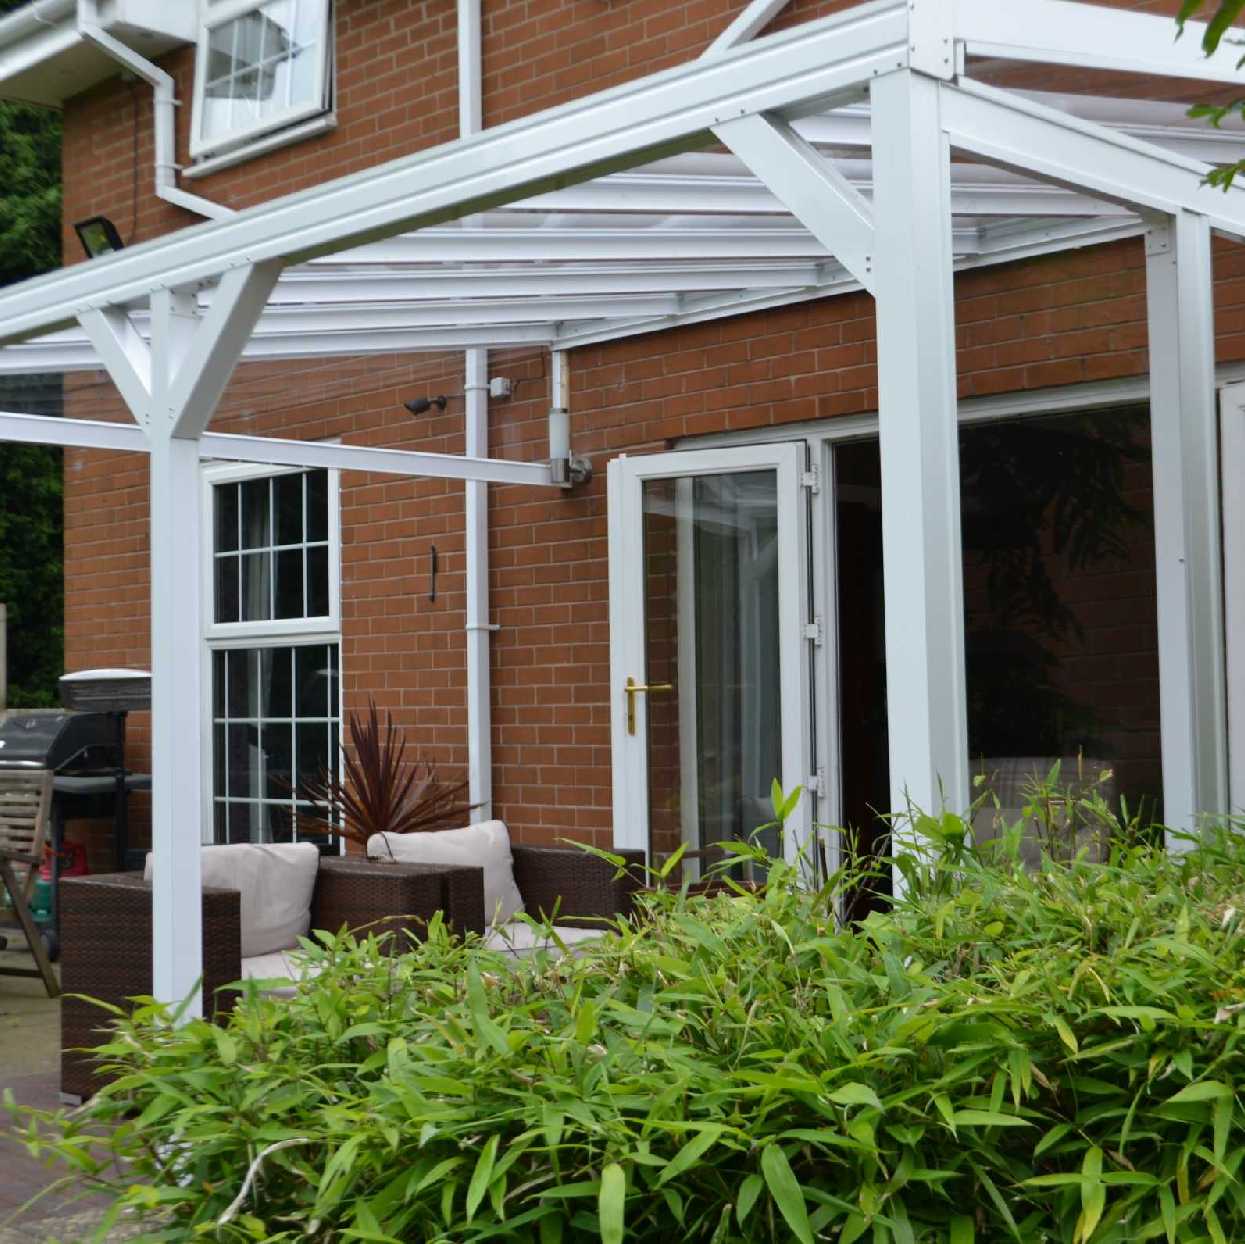 Omega Smart Lean-To Canopy, White with 6mm Glass Clear Plate Polycarbonate Glazing - 5.6m (W) x 2.0m (P), (3) Supporting Posts from Omega Build